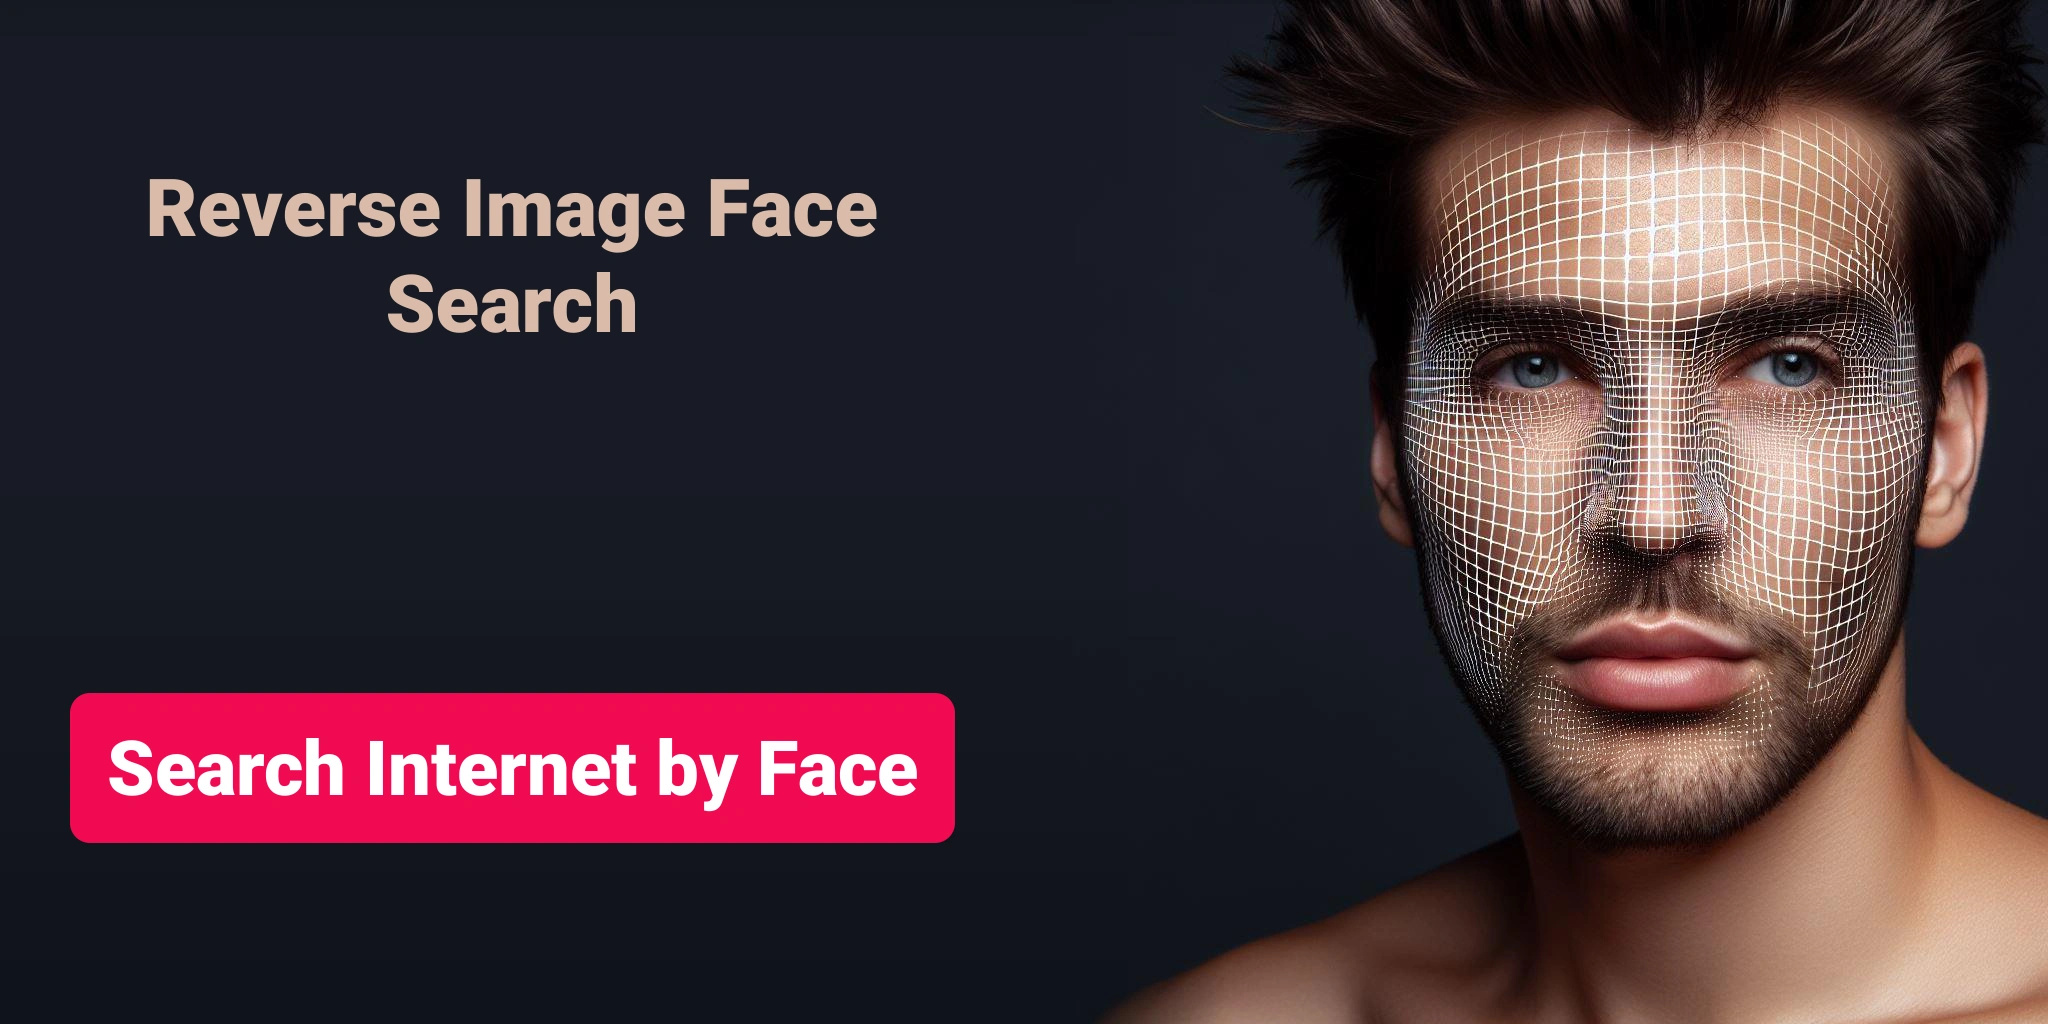 Search Internet by Face, Reverse Image Face Search